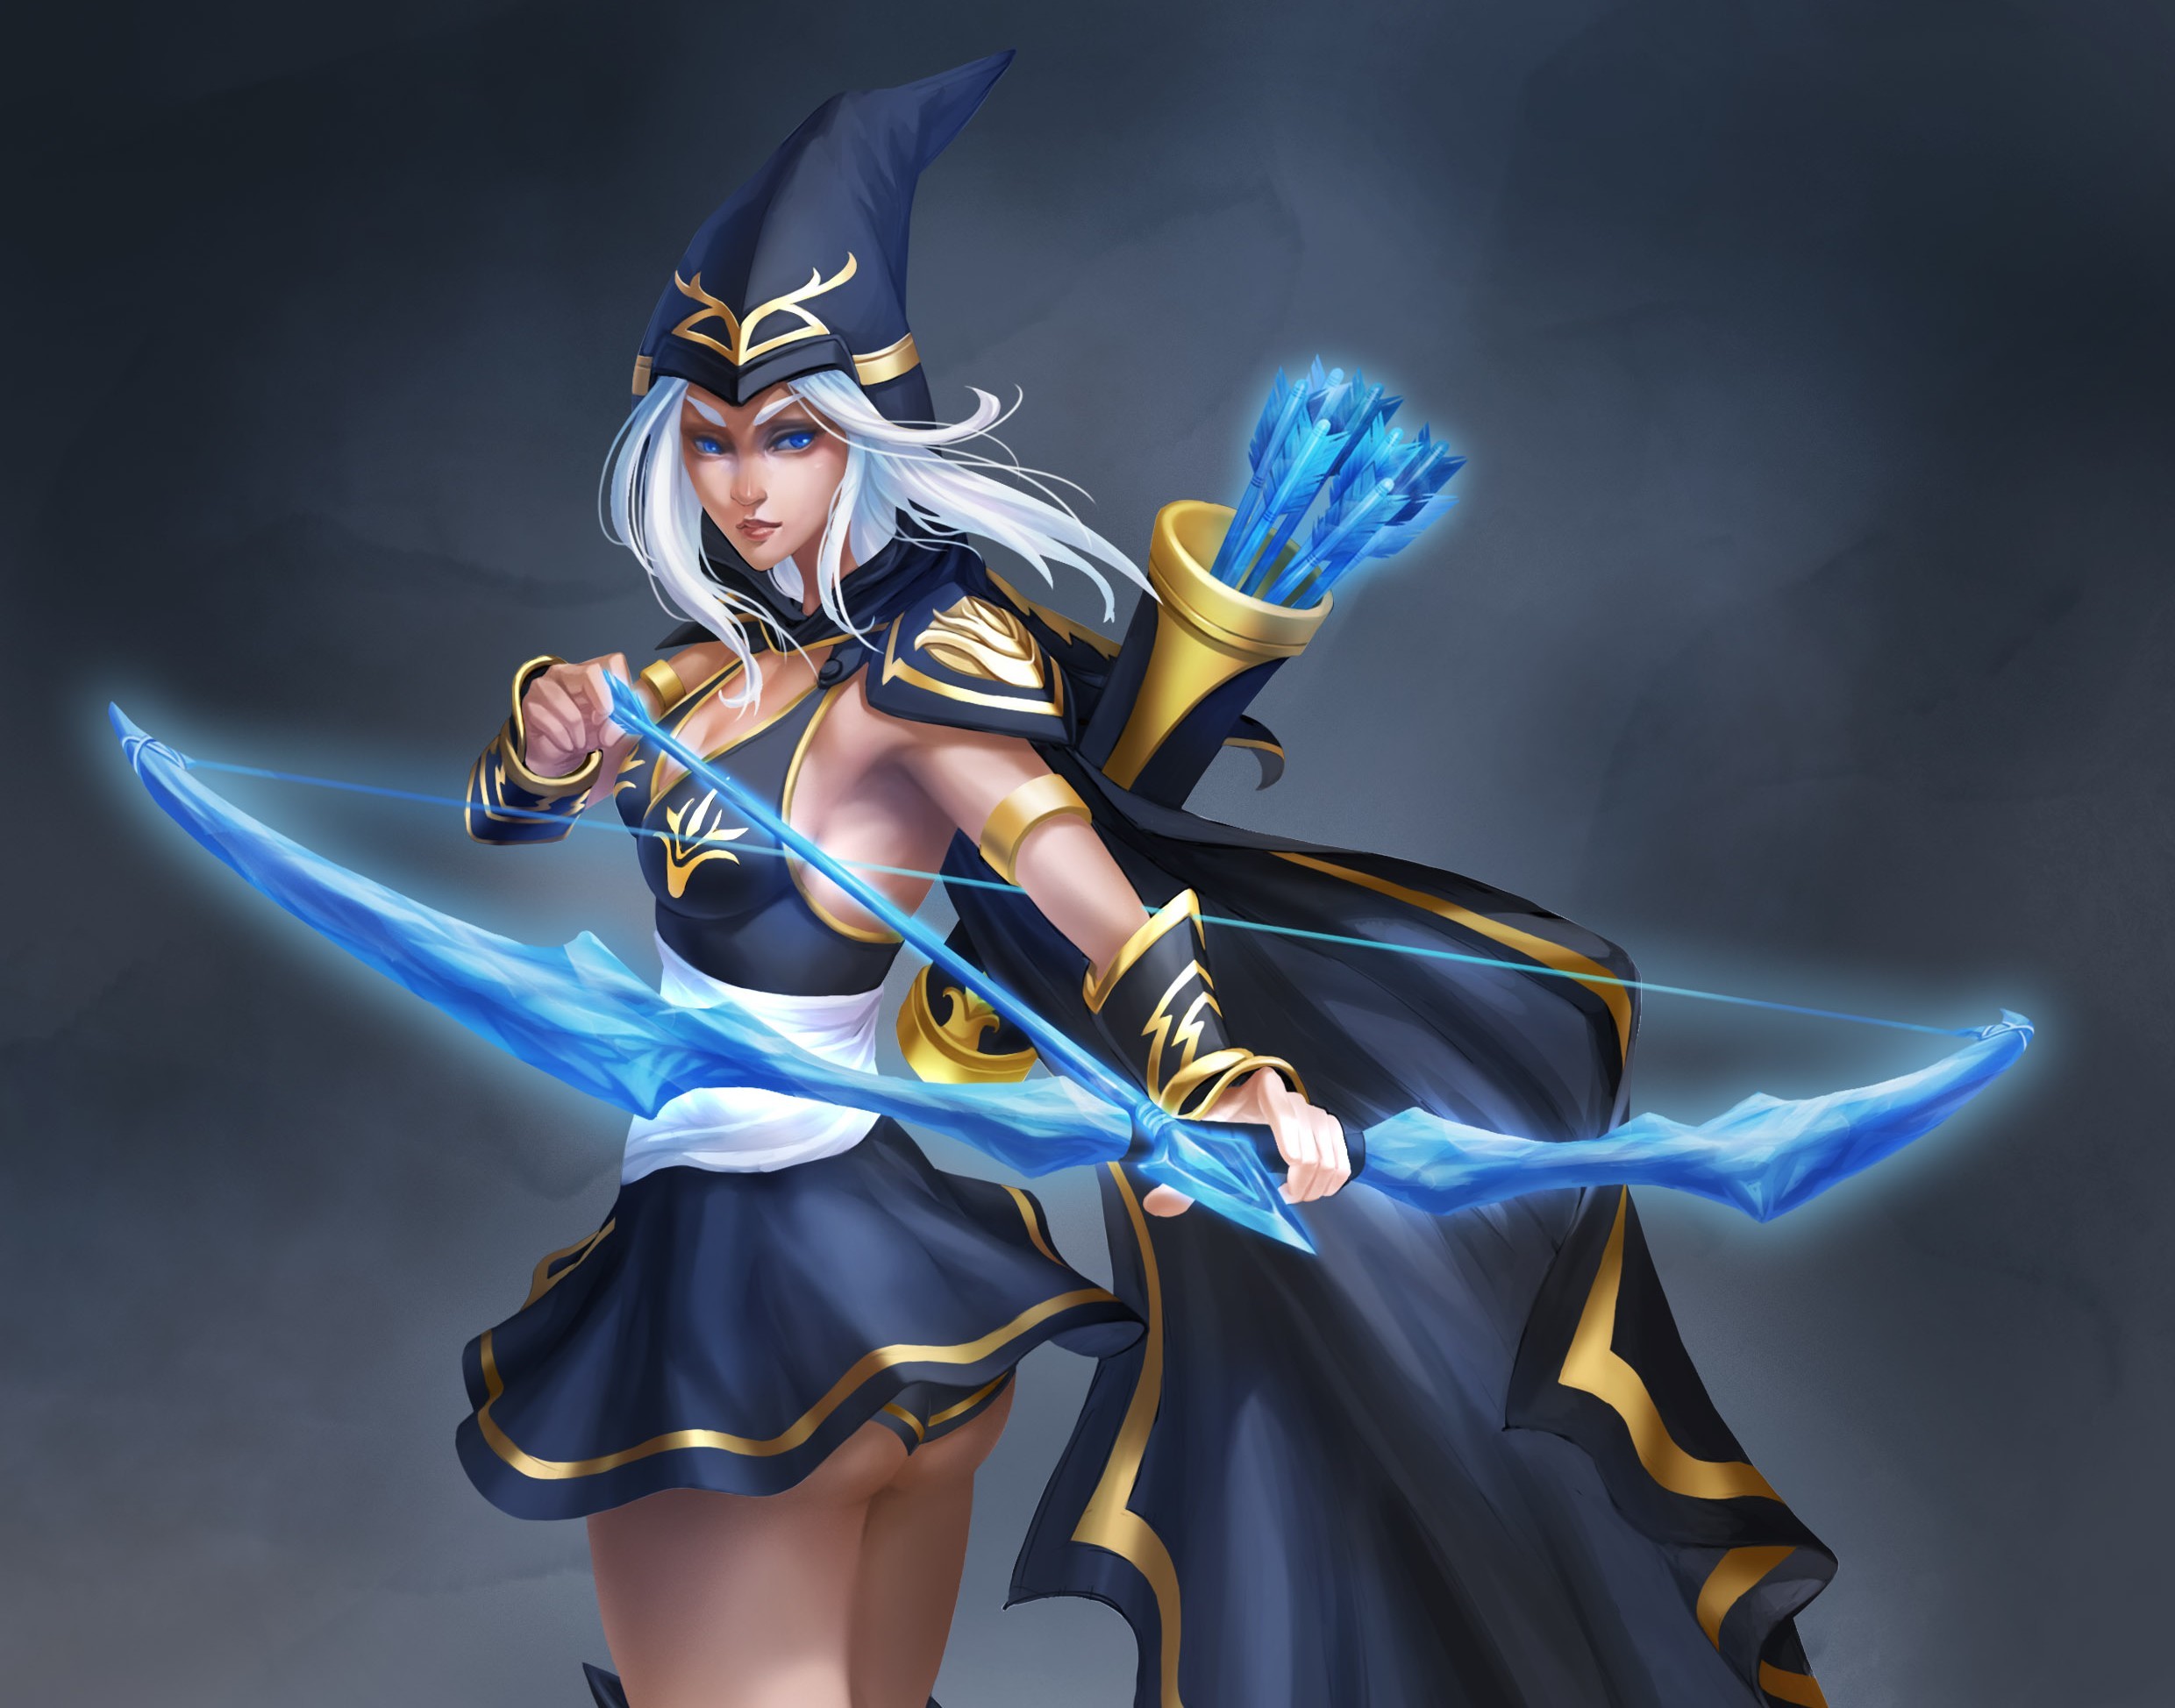 ashe wallpaper,cg artwork,action figure,figurine,fictional character,massively multiplayer online role playing game